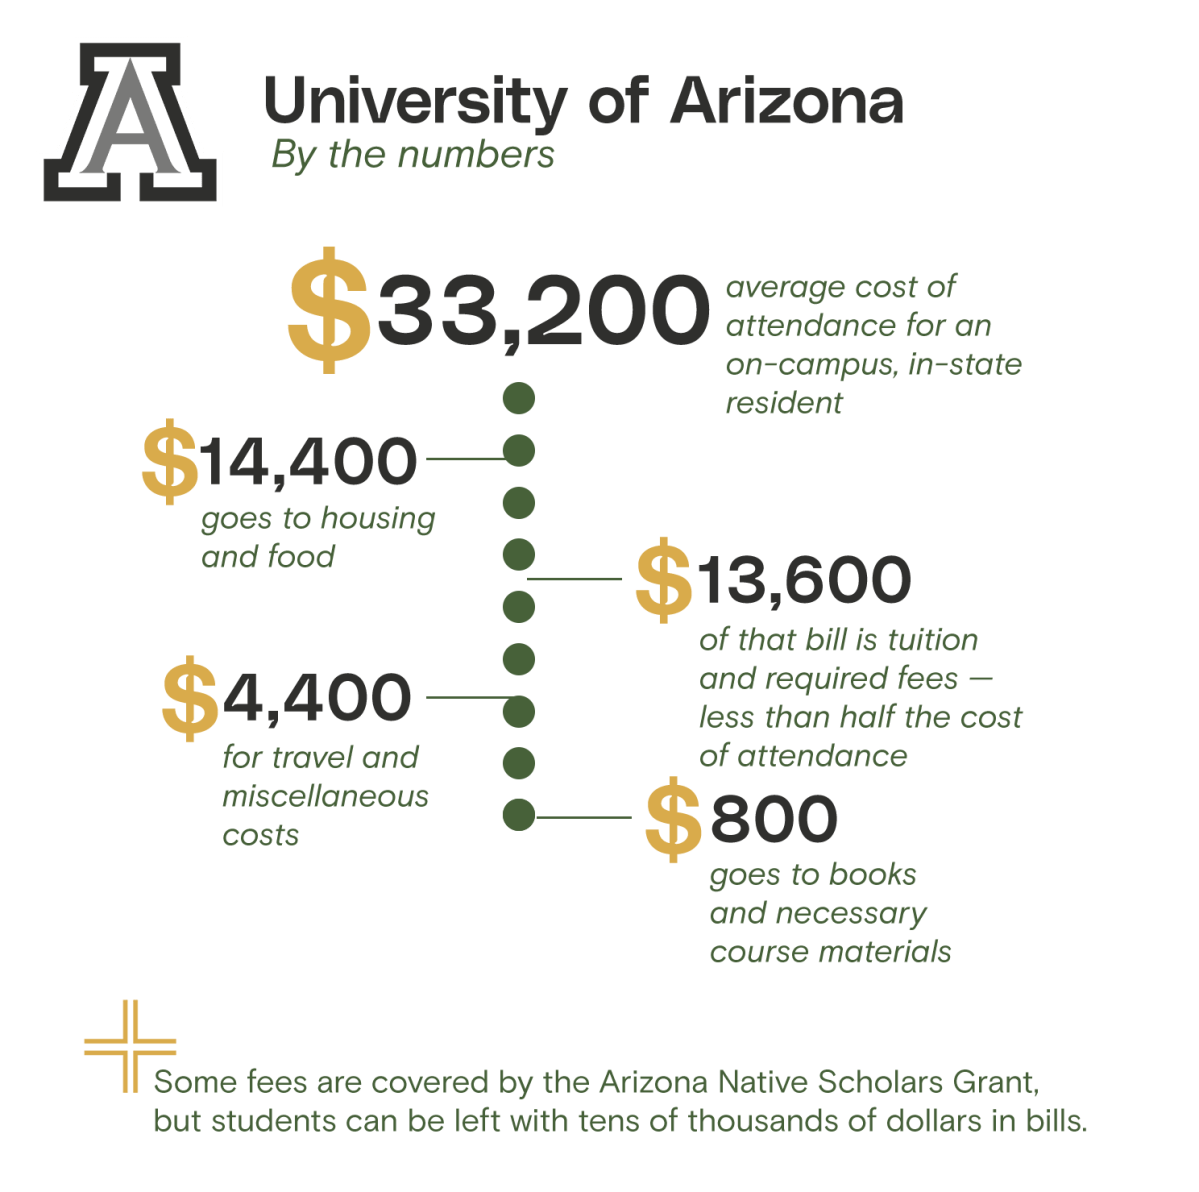 An infographic breaking down the cost of attendance at the University of Arizona.